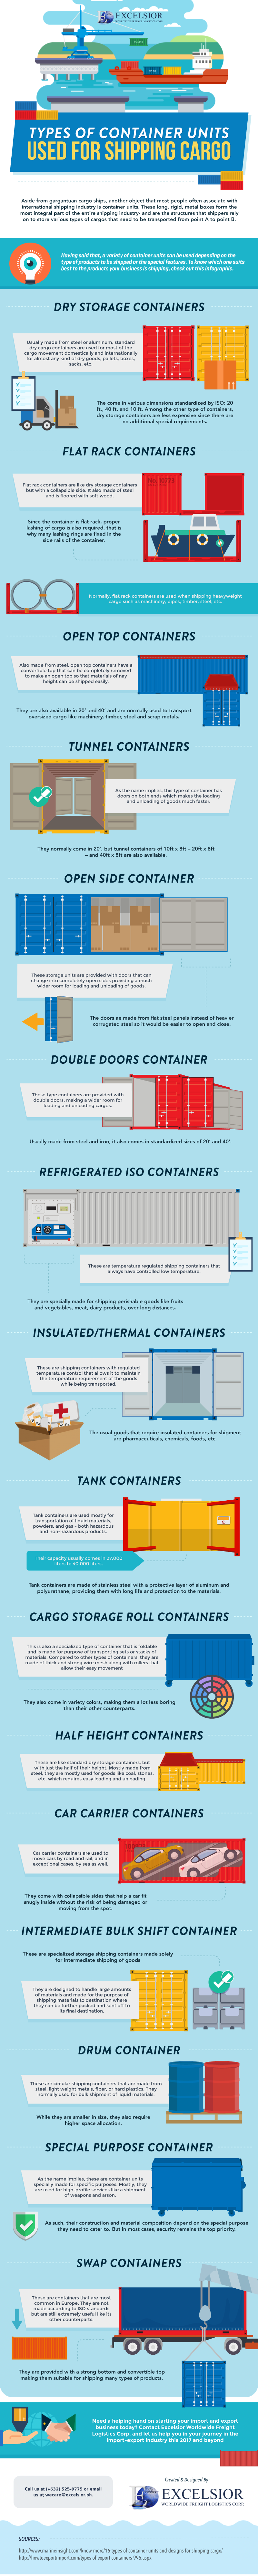 Types of Container Units Used for Shipping Cargo